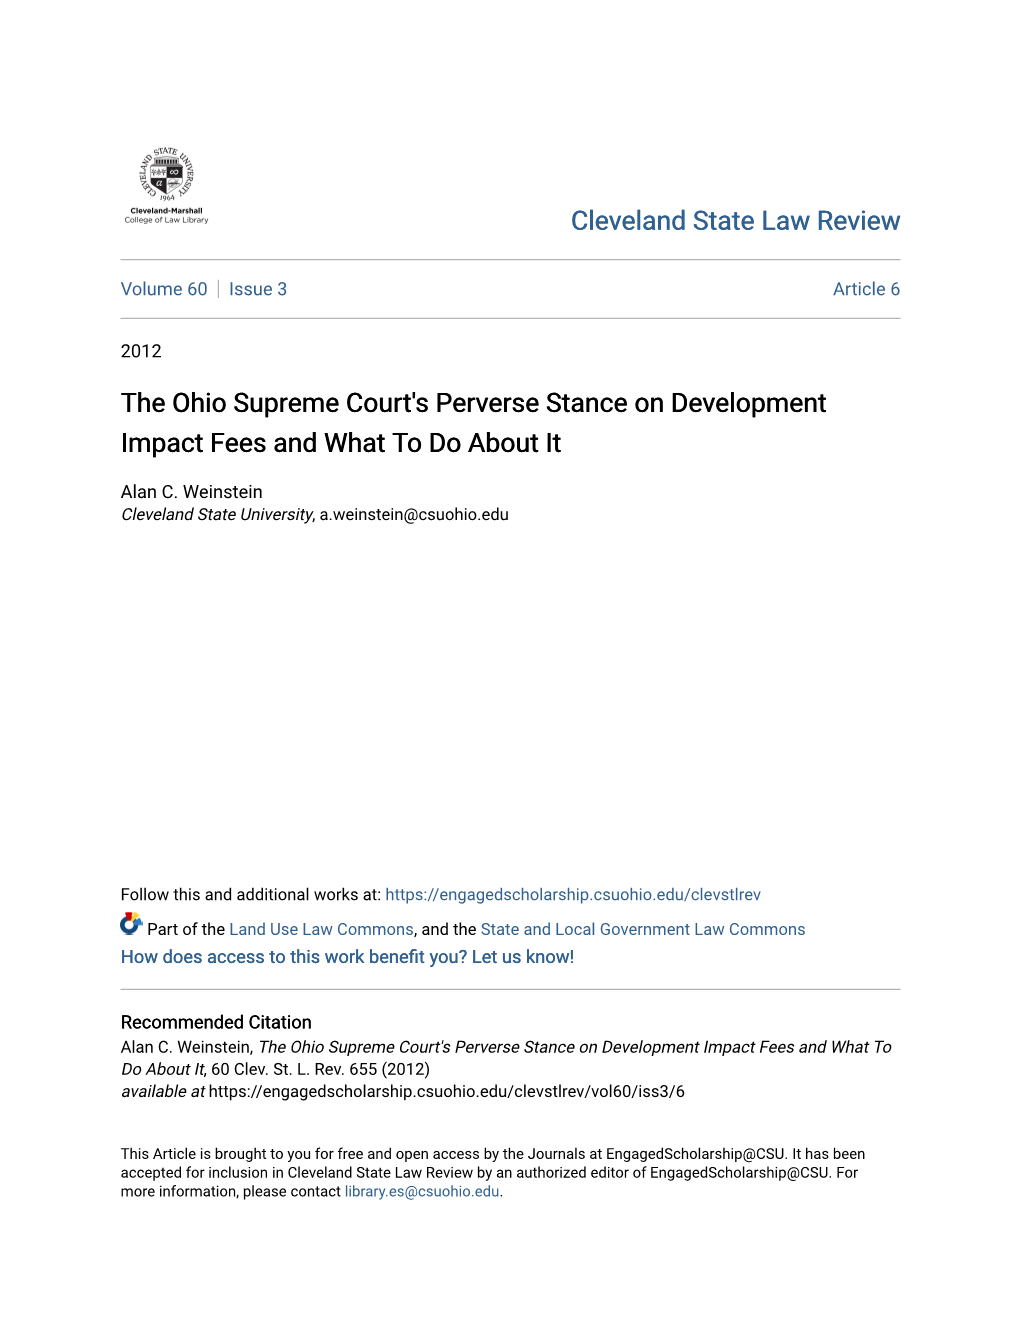 The Ohio Supreme Court's Perverse Stance on Development Impact Fees and What to Do About It